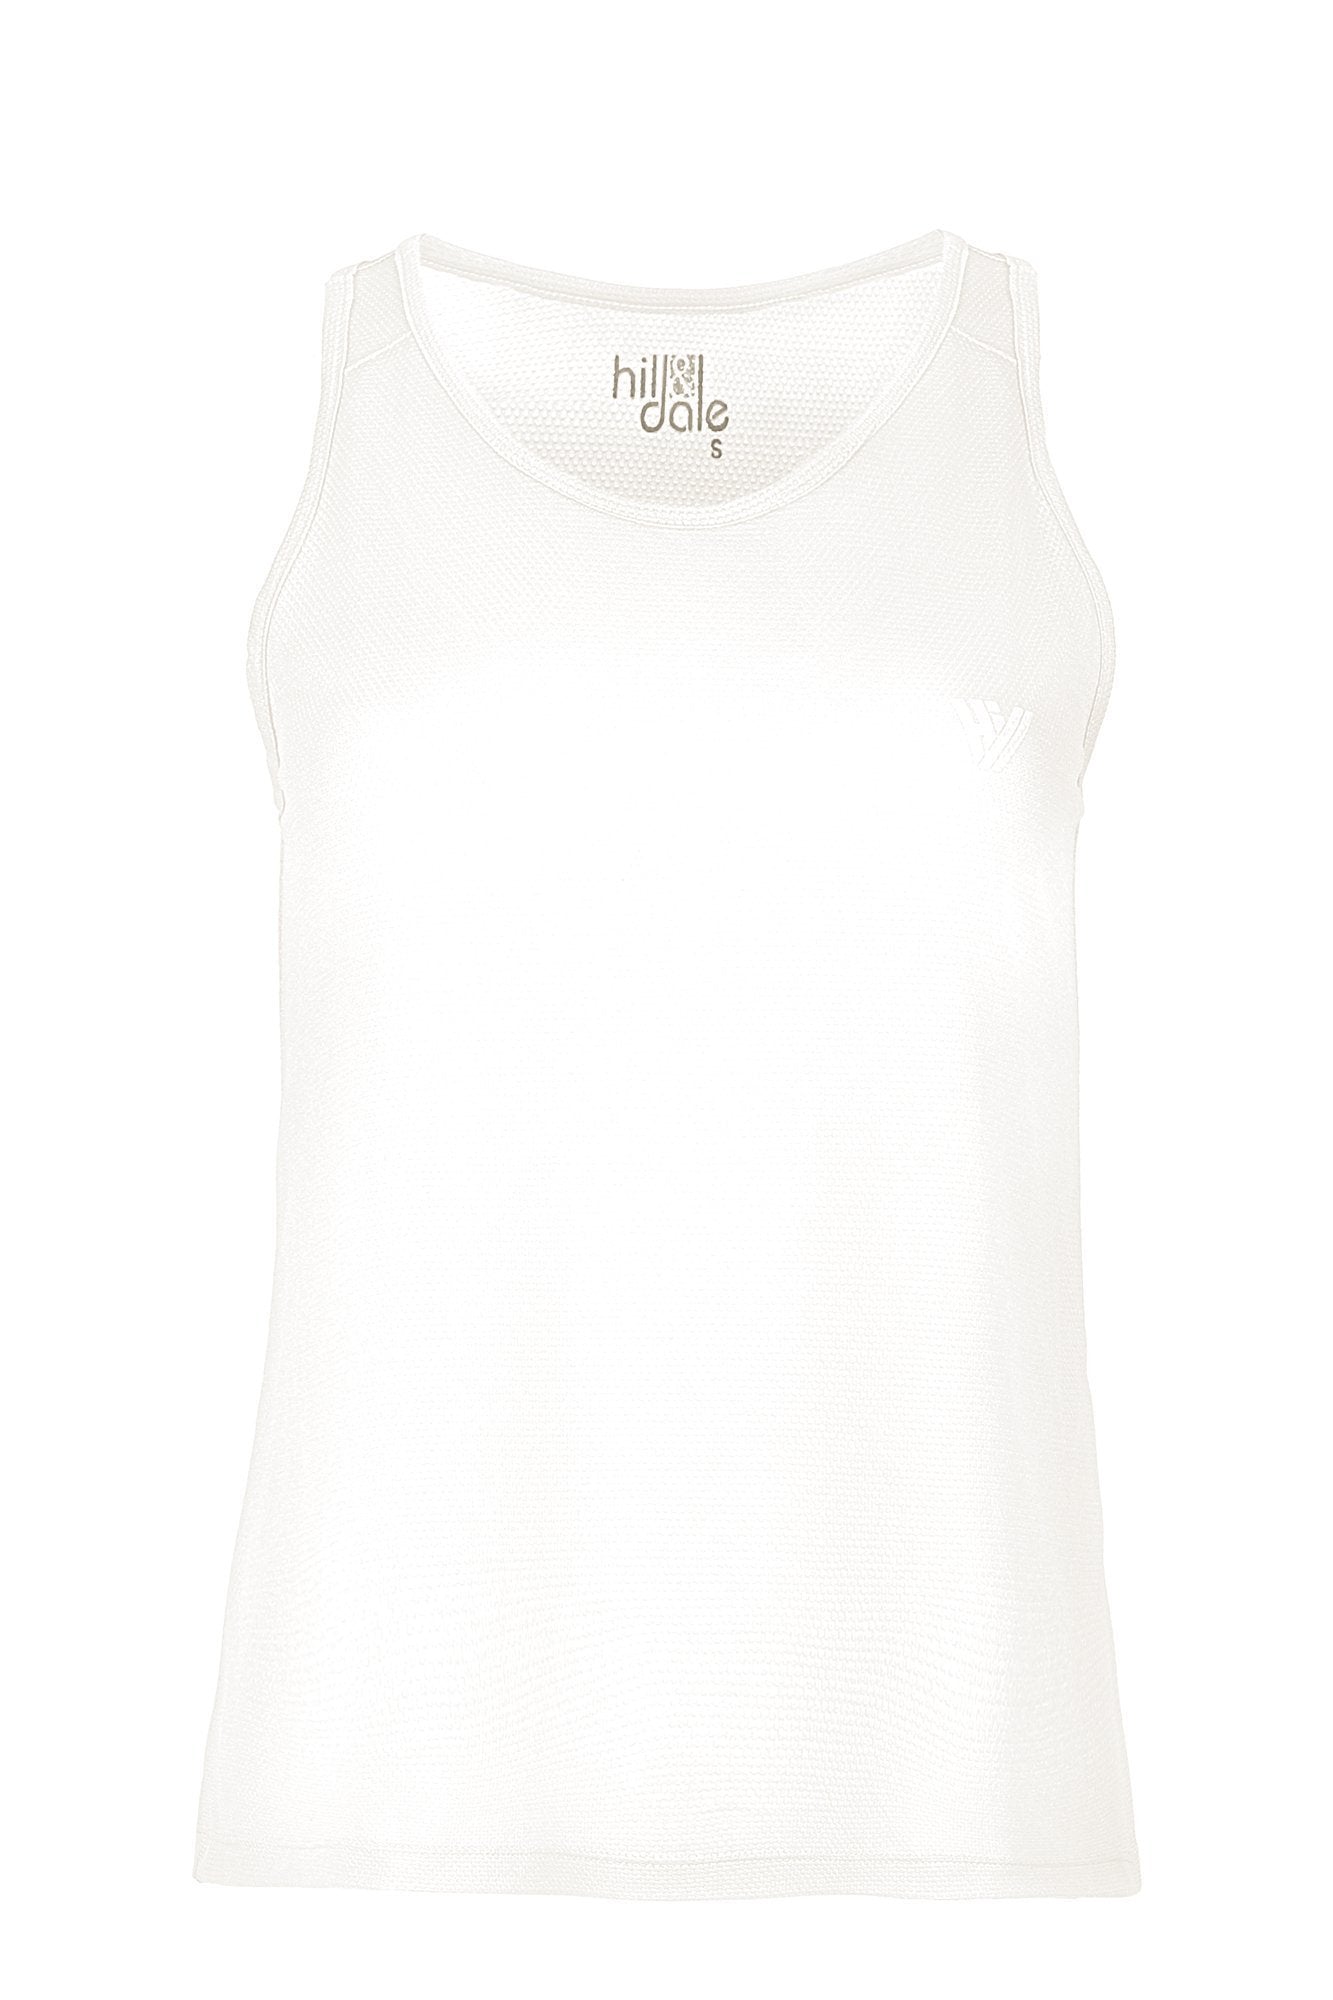 hill & dale run singlet top hill & dale white XS 100% Polyester